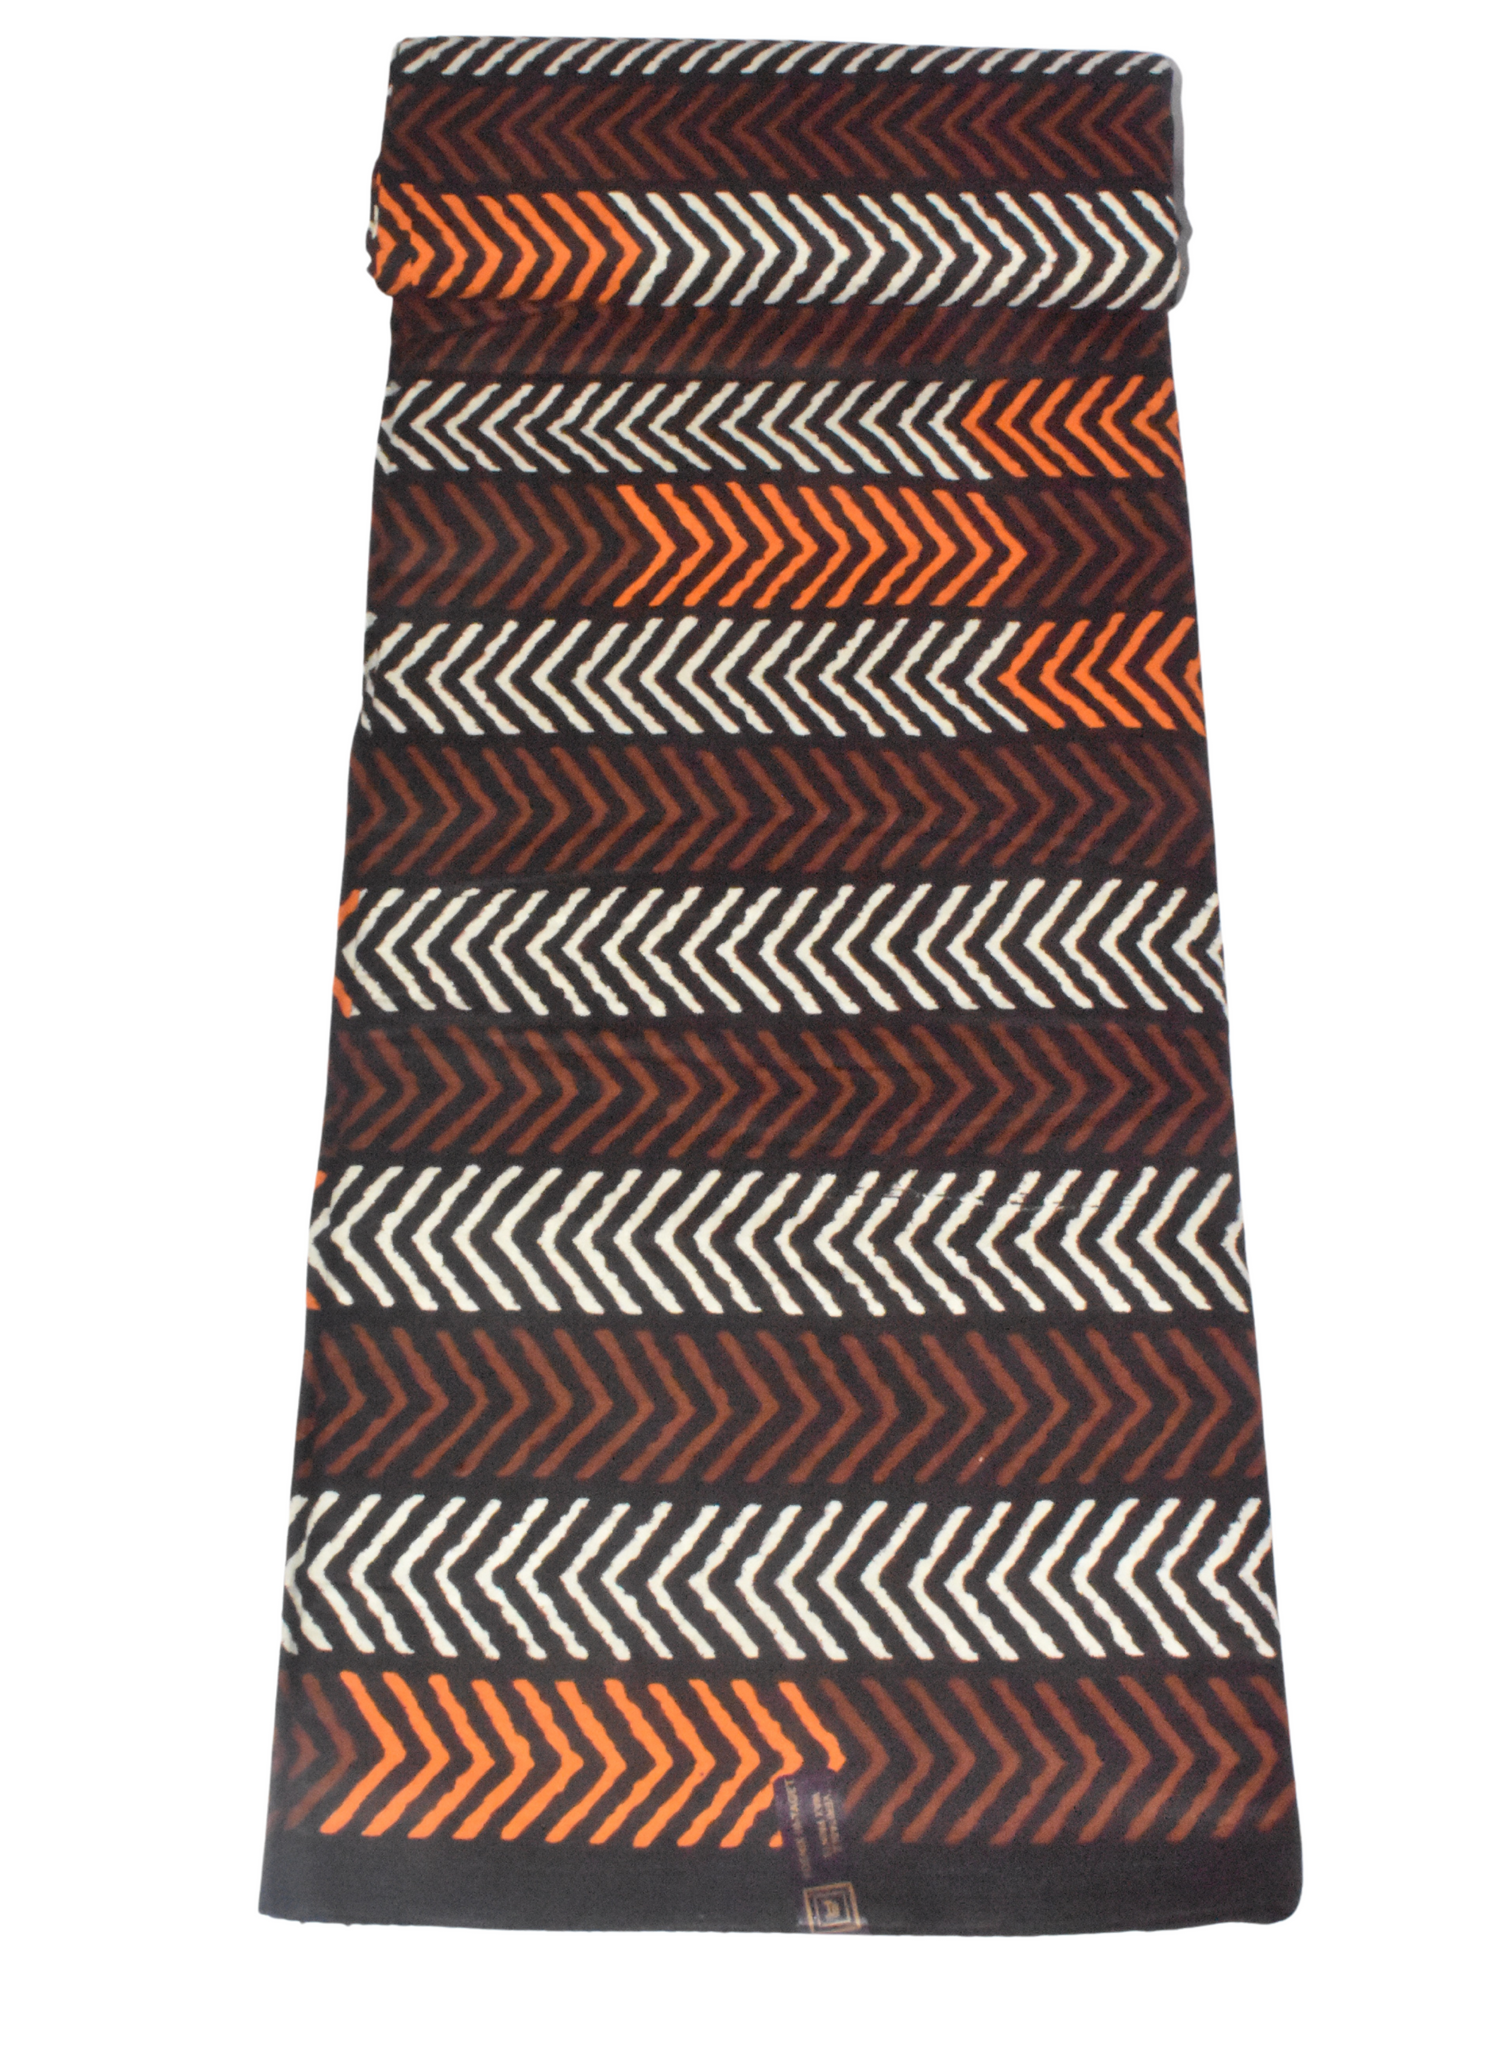 White, Orange and Brown African Print - CA284